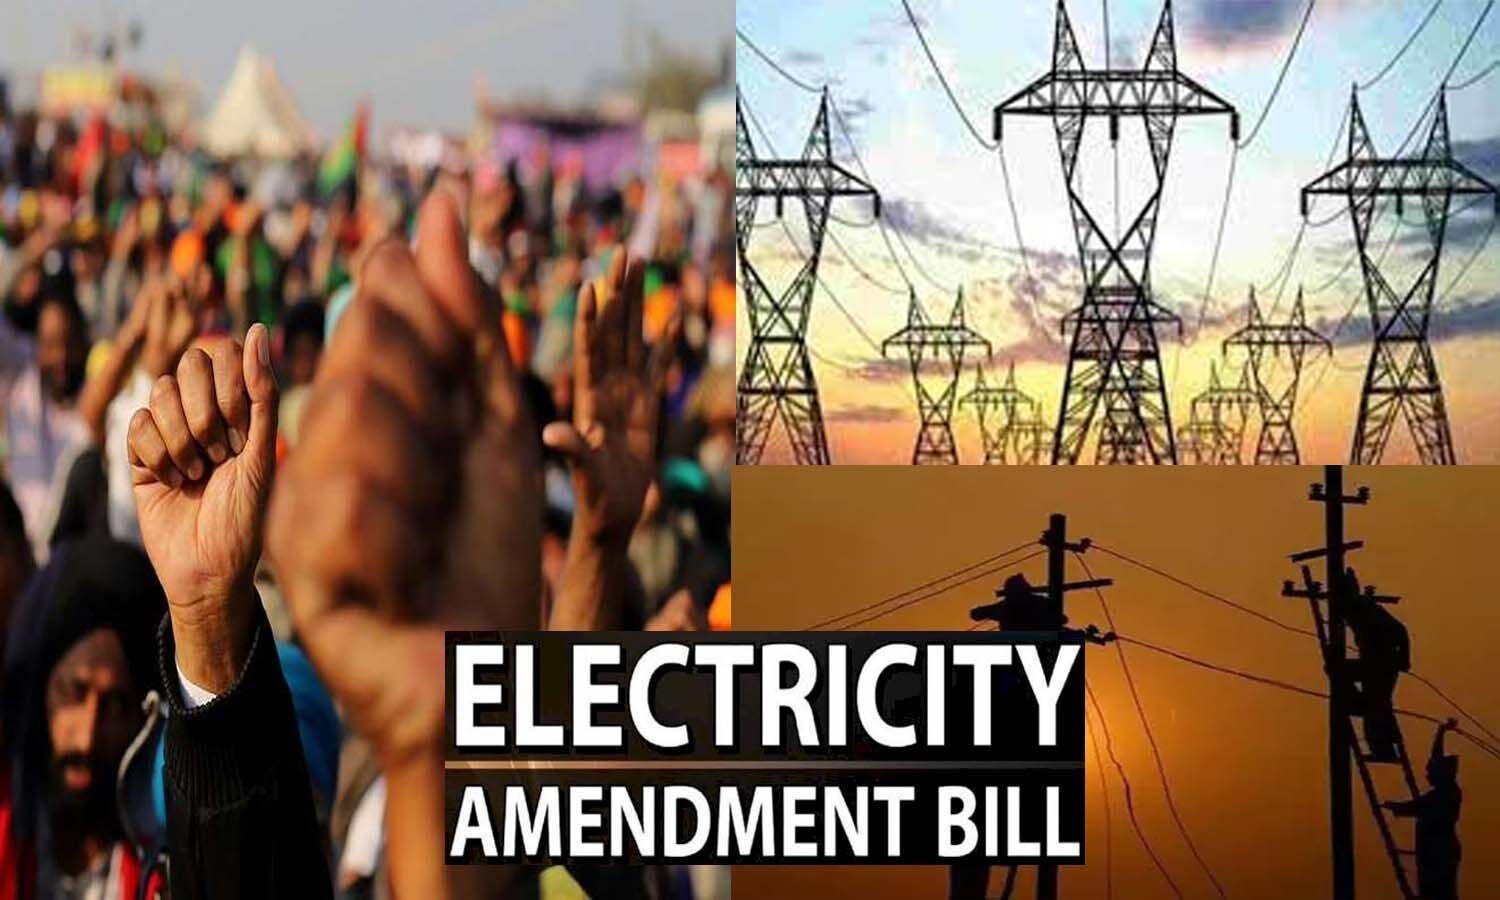 Electricity Amendment Bill 2022: Work will stop on August 8, electricity workers and engineers will protest against the bill